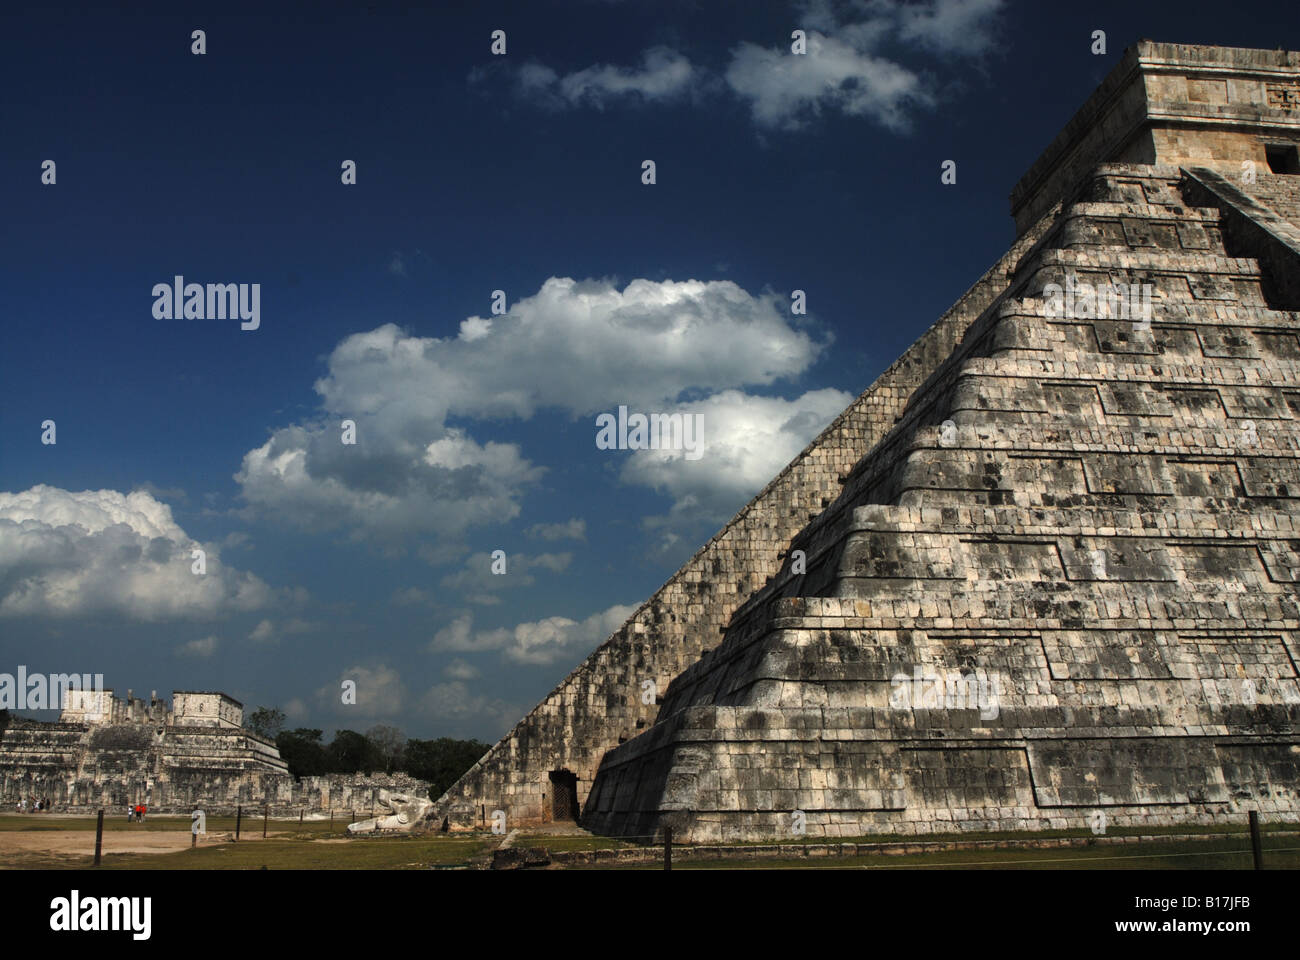 The Mayan temple of Chitchen Itza, Mexico Stock Photo